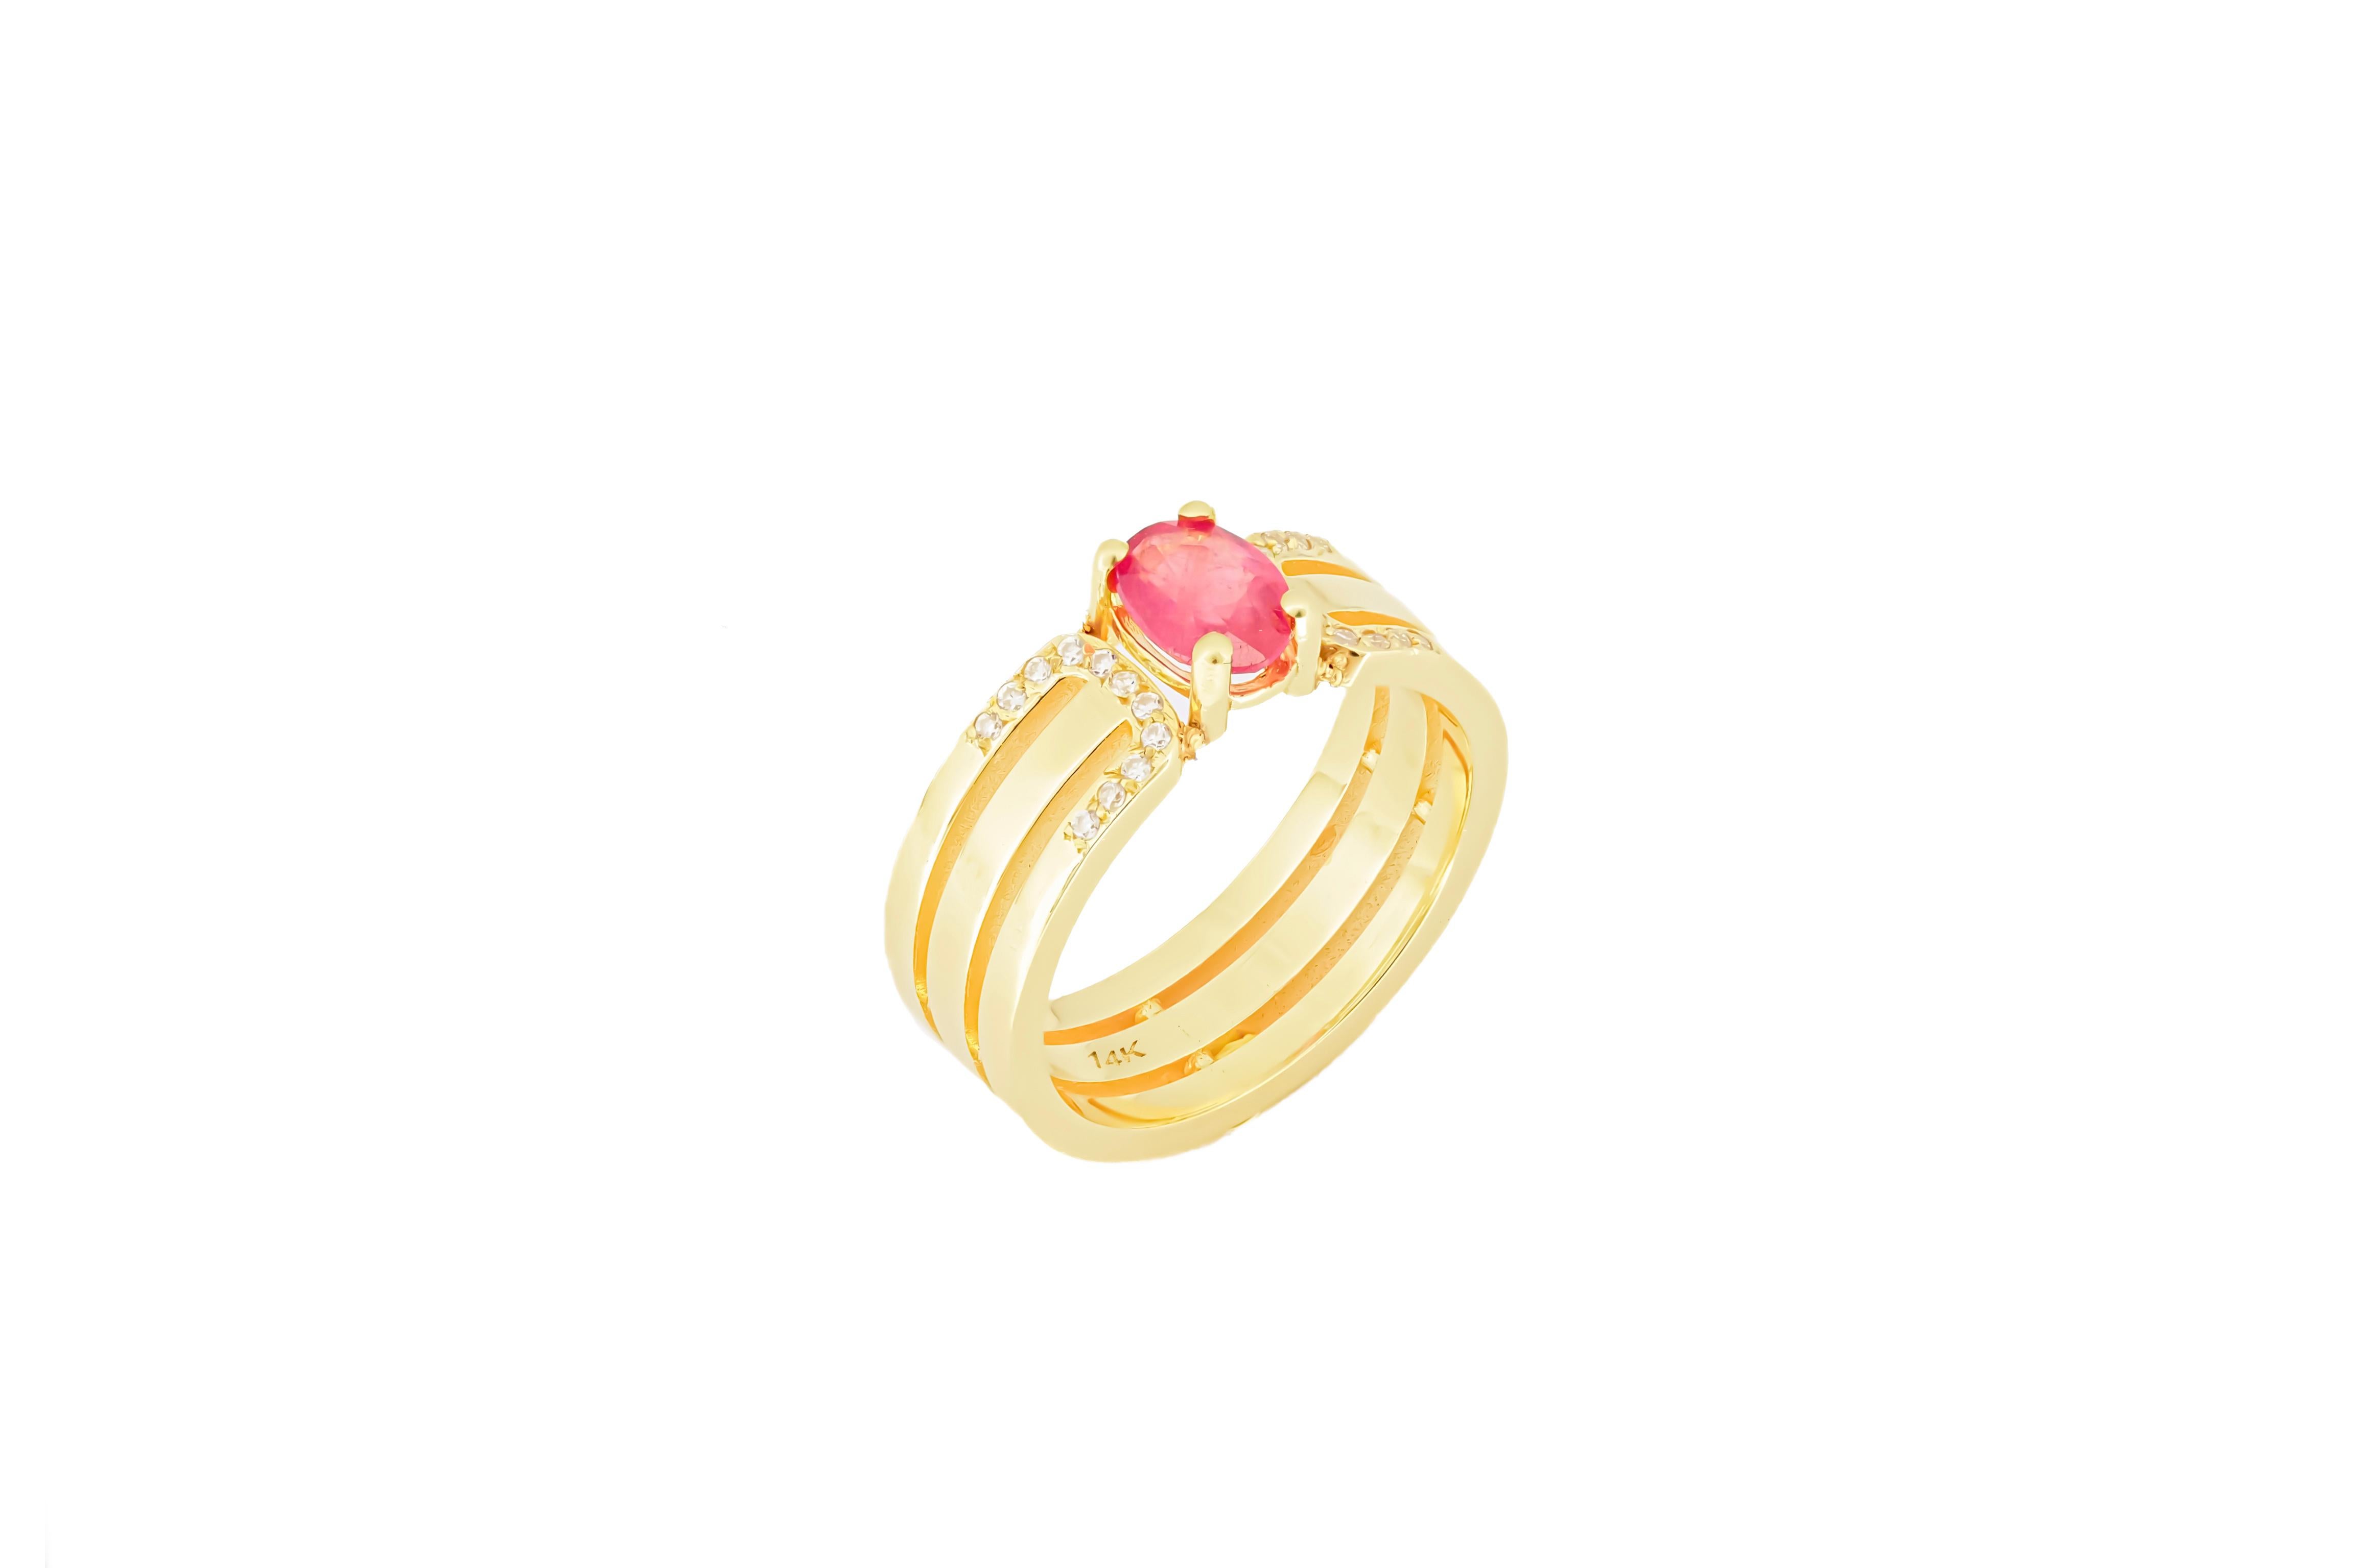 Men's 14 K Gold Mens Ring with Ruby.  For Sale